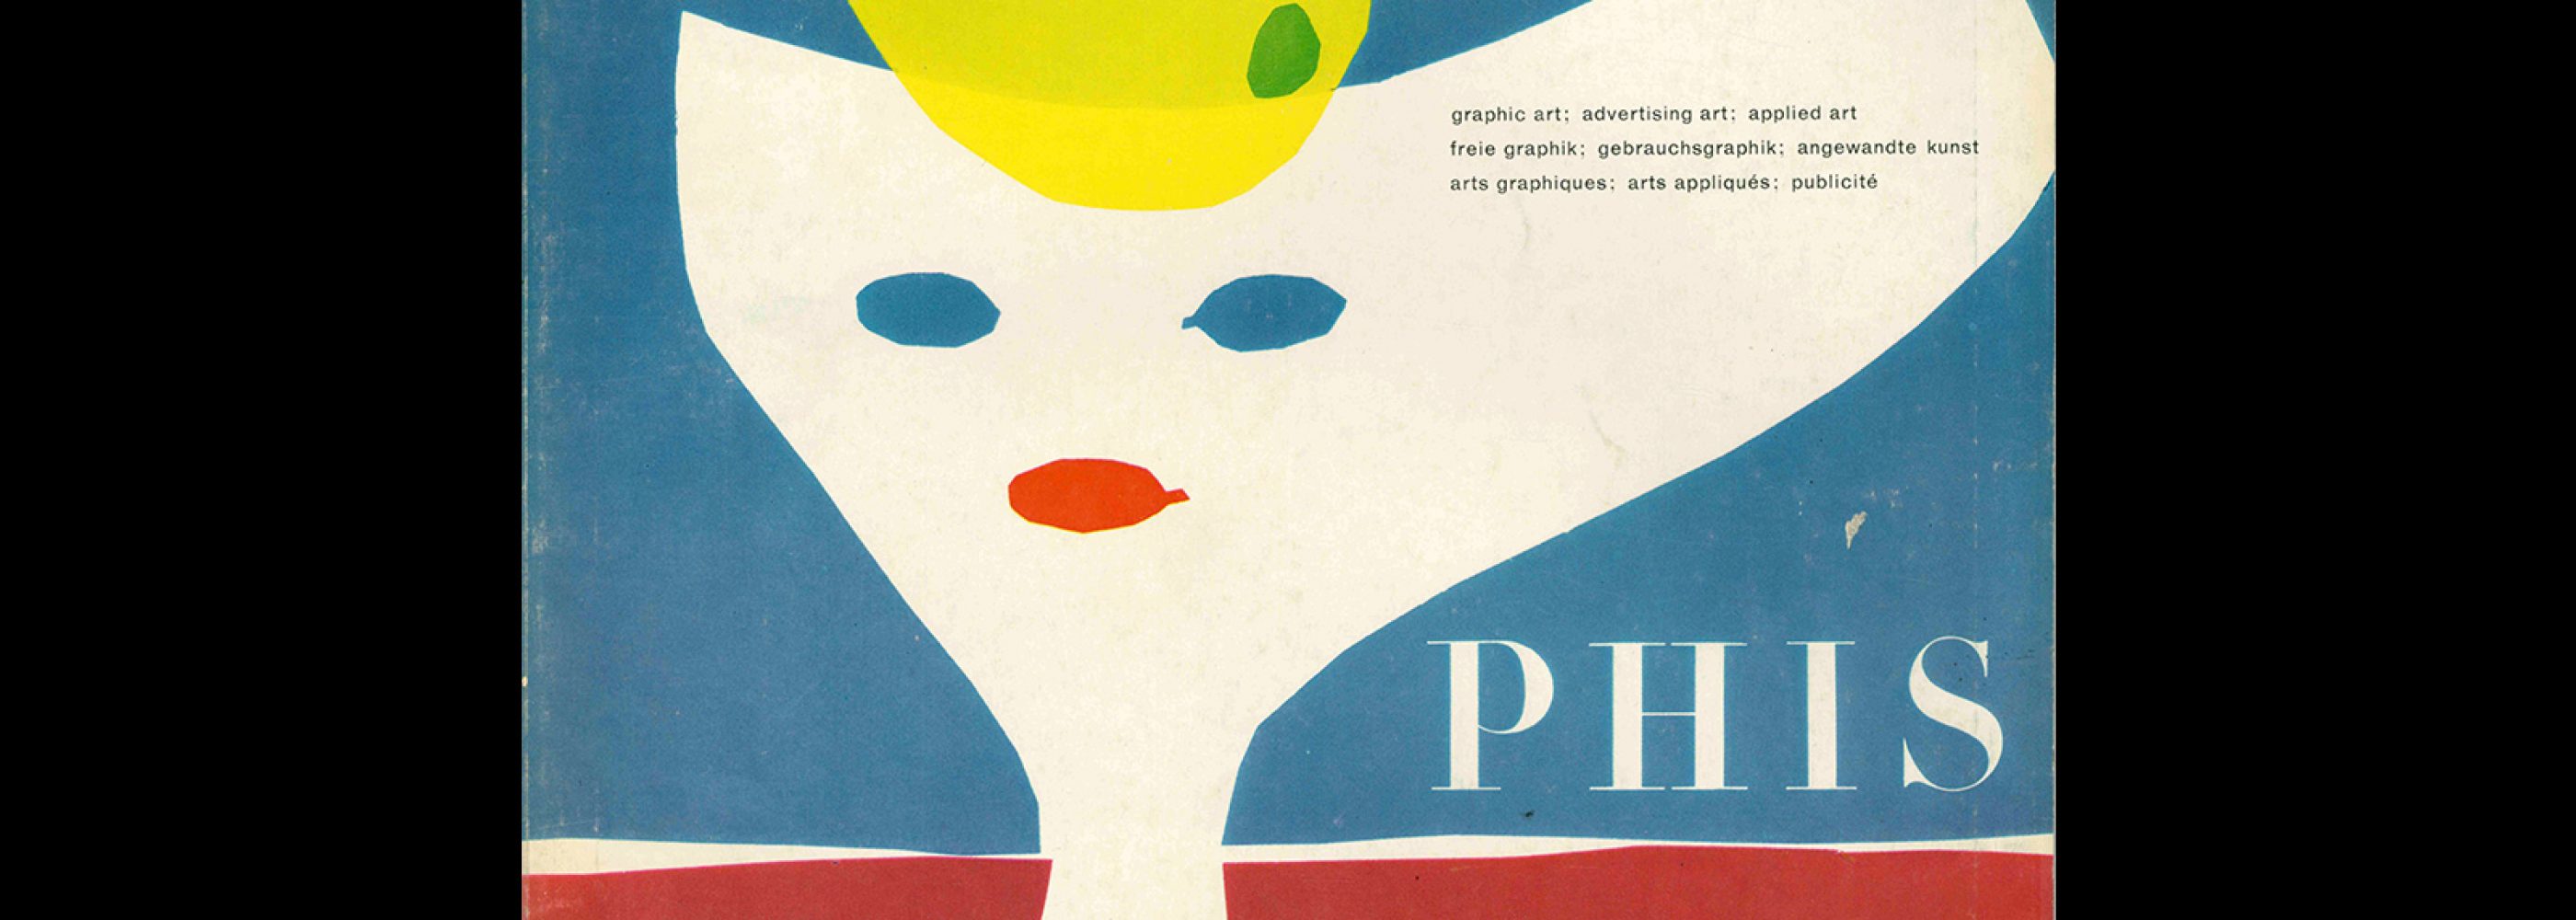 Graphis 85, 1959. Cover design by Hans Hartmann.